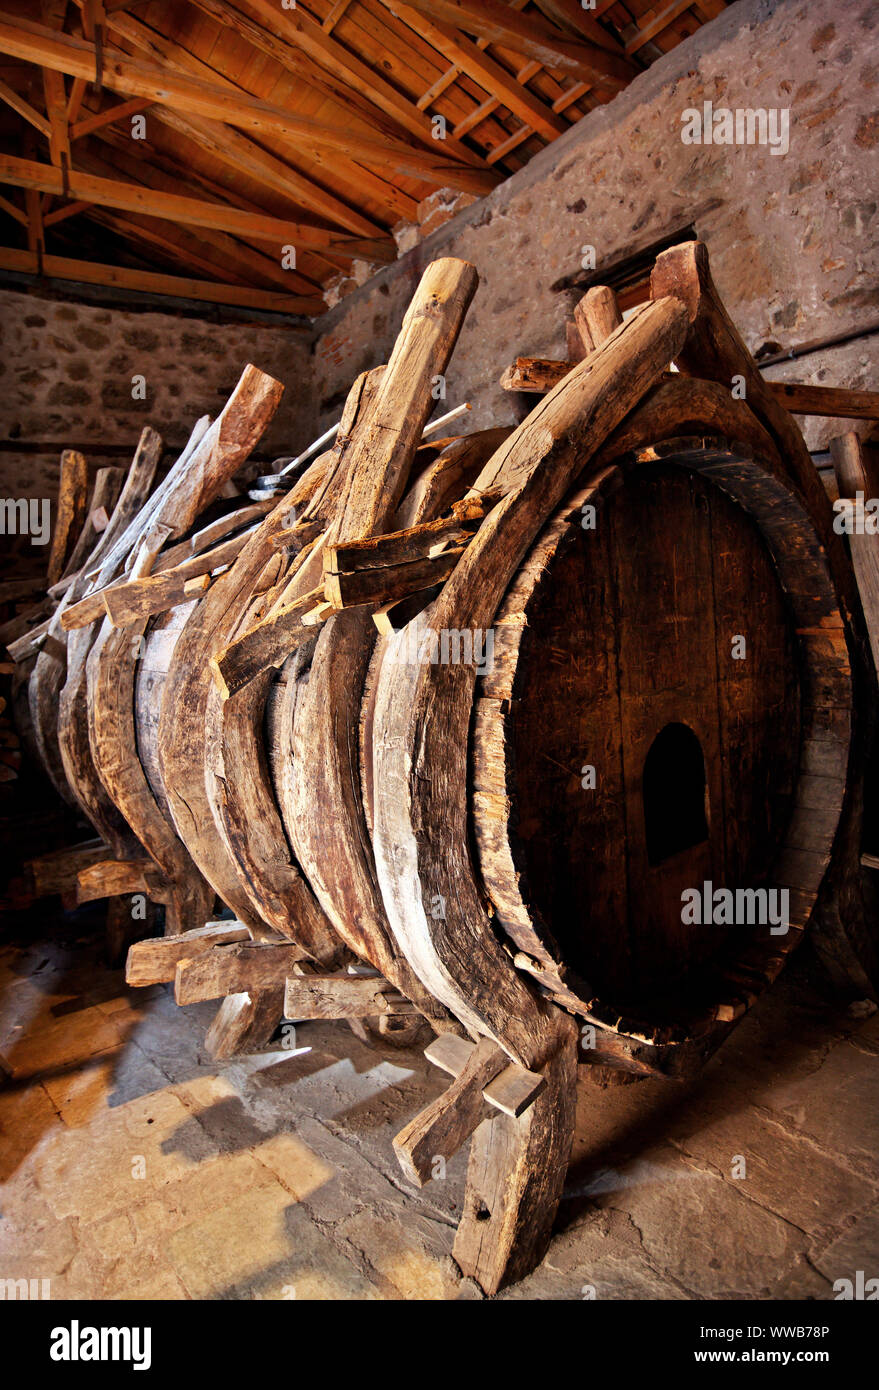 A gigantic wooden barrel (12.000 liters) for wine storage, in Varlaam monastery, Meteora, Trikala, Thessaly, Greece. Stock Photo